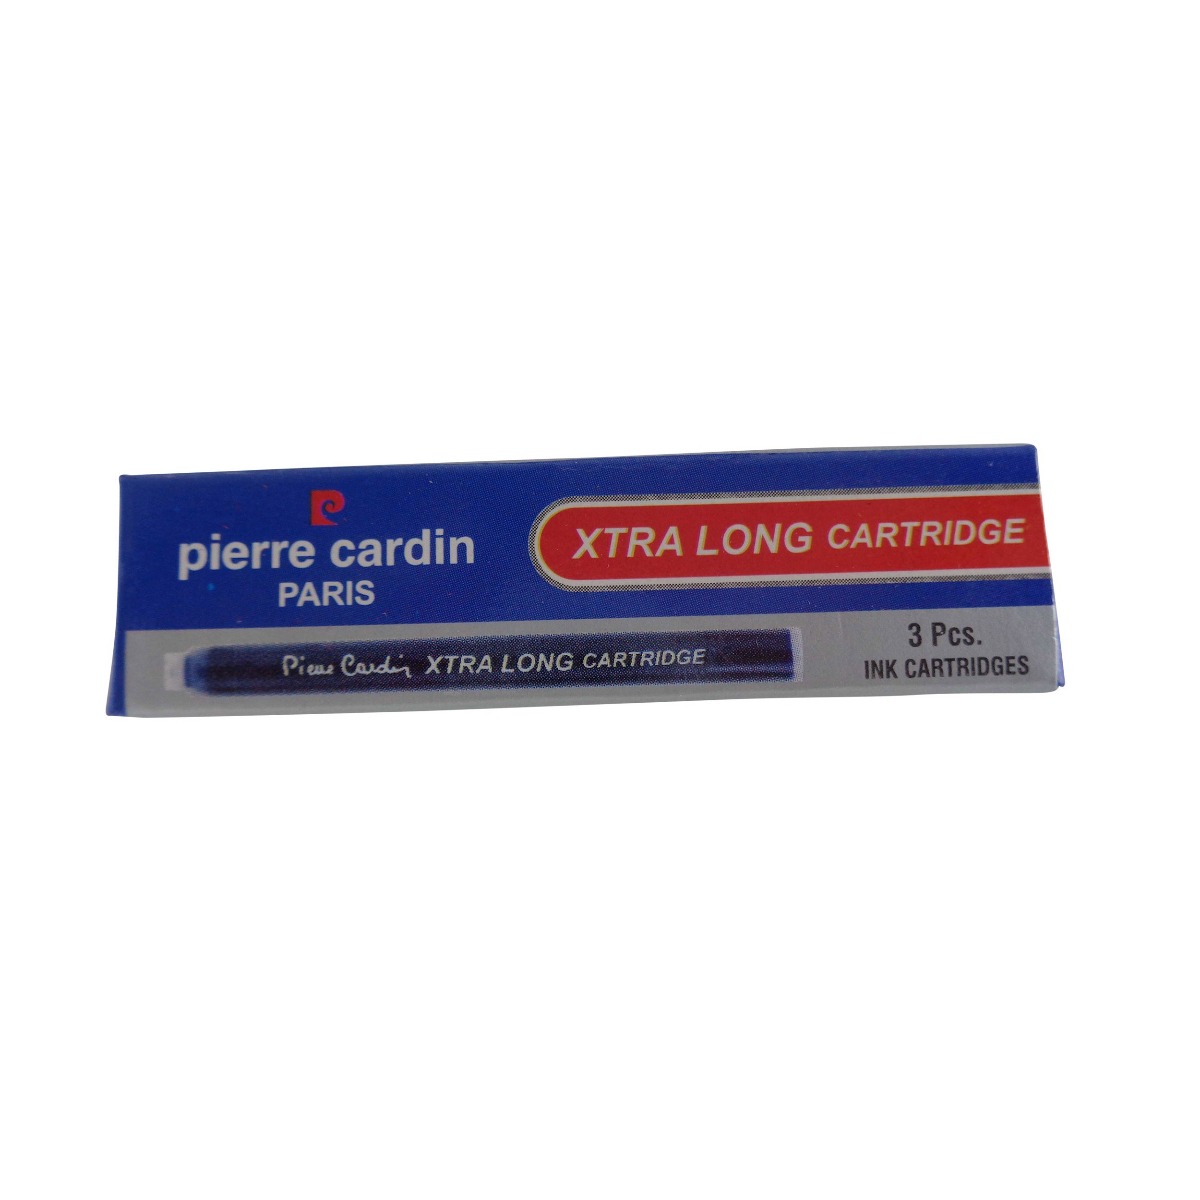 Pierre cardin   Model: 70549 Xtra long blue ink cartridge  with 3 pieces in a pack